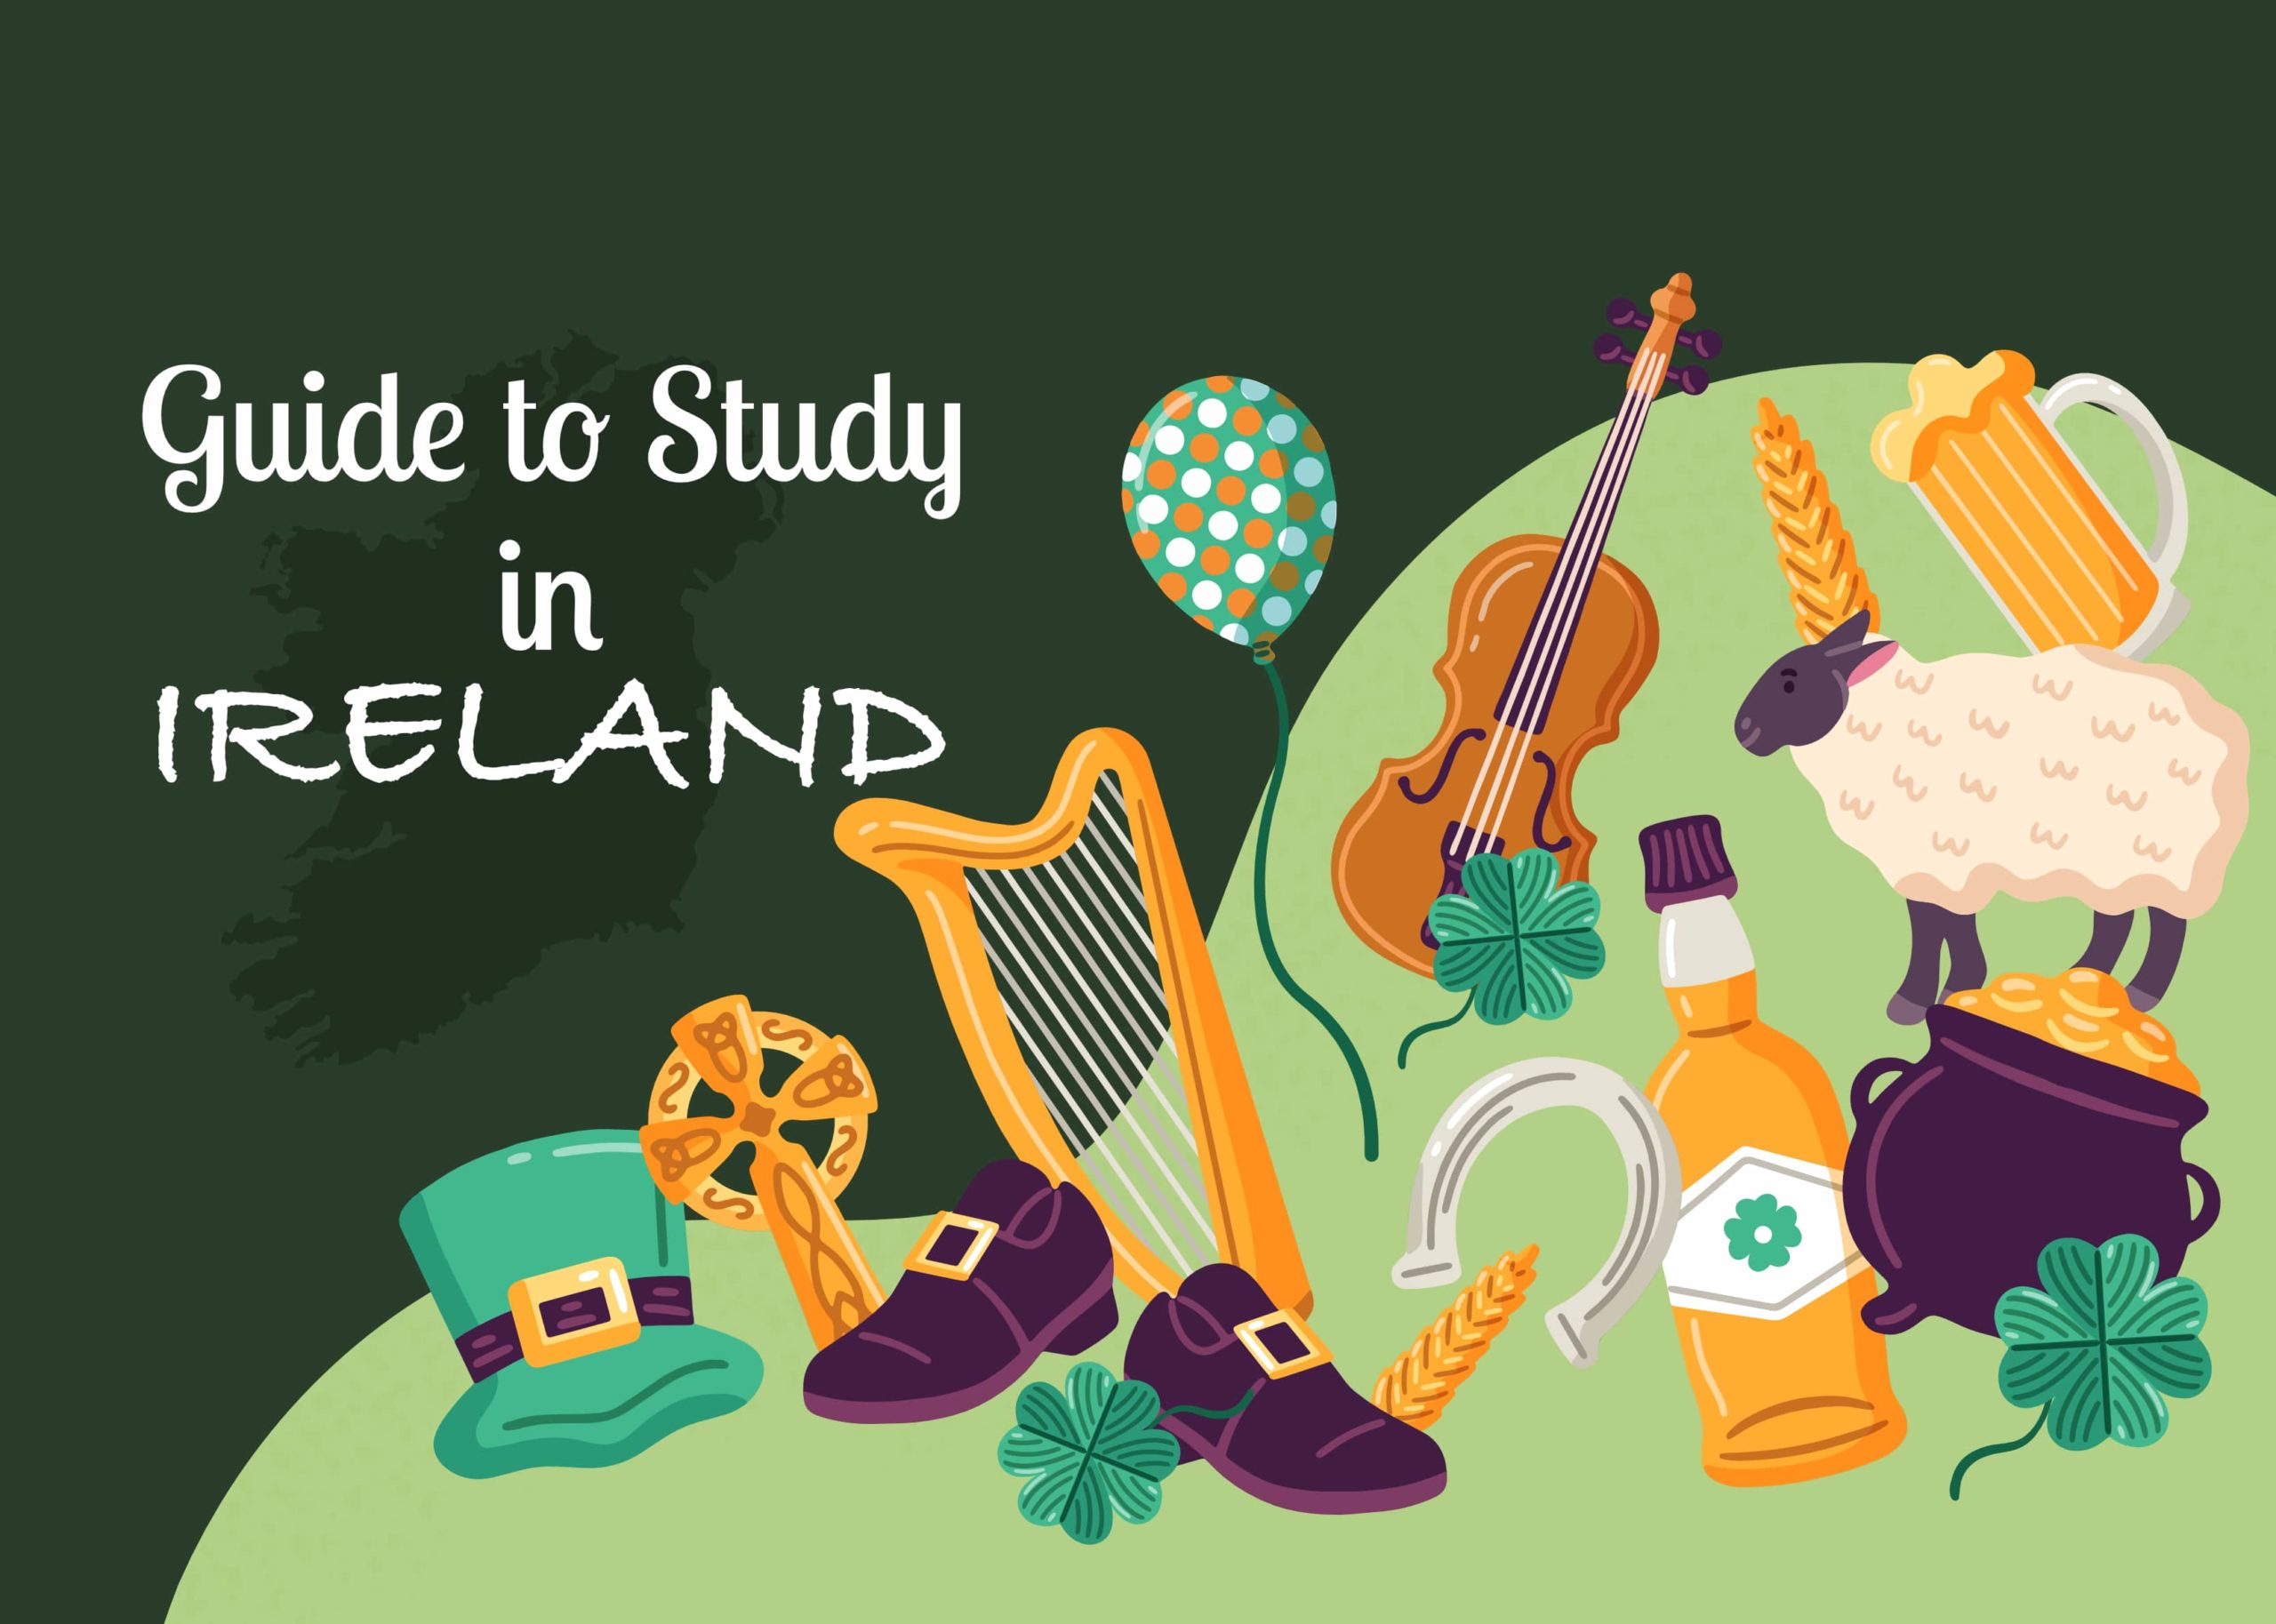 Guide to Study in Ireland